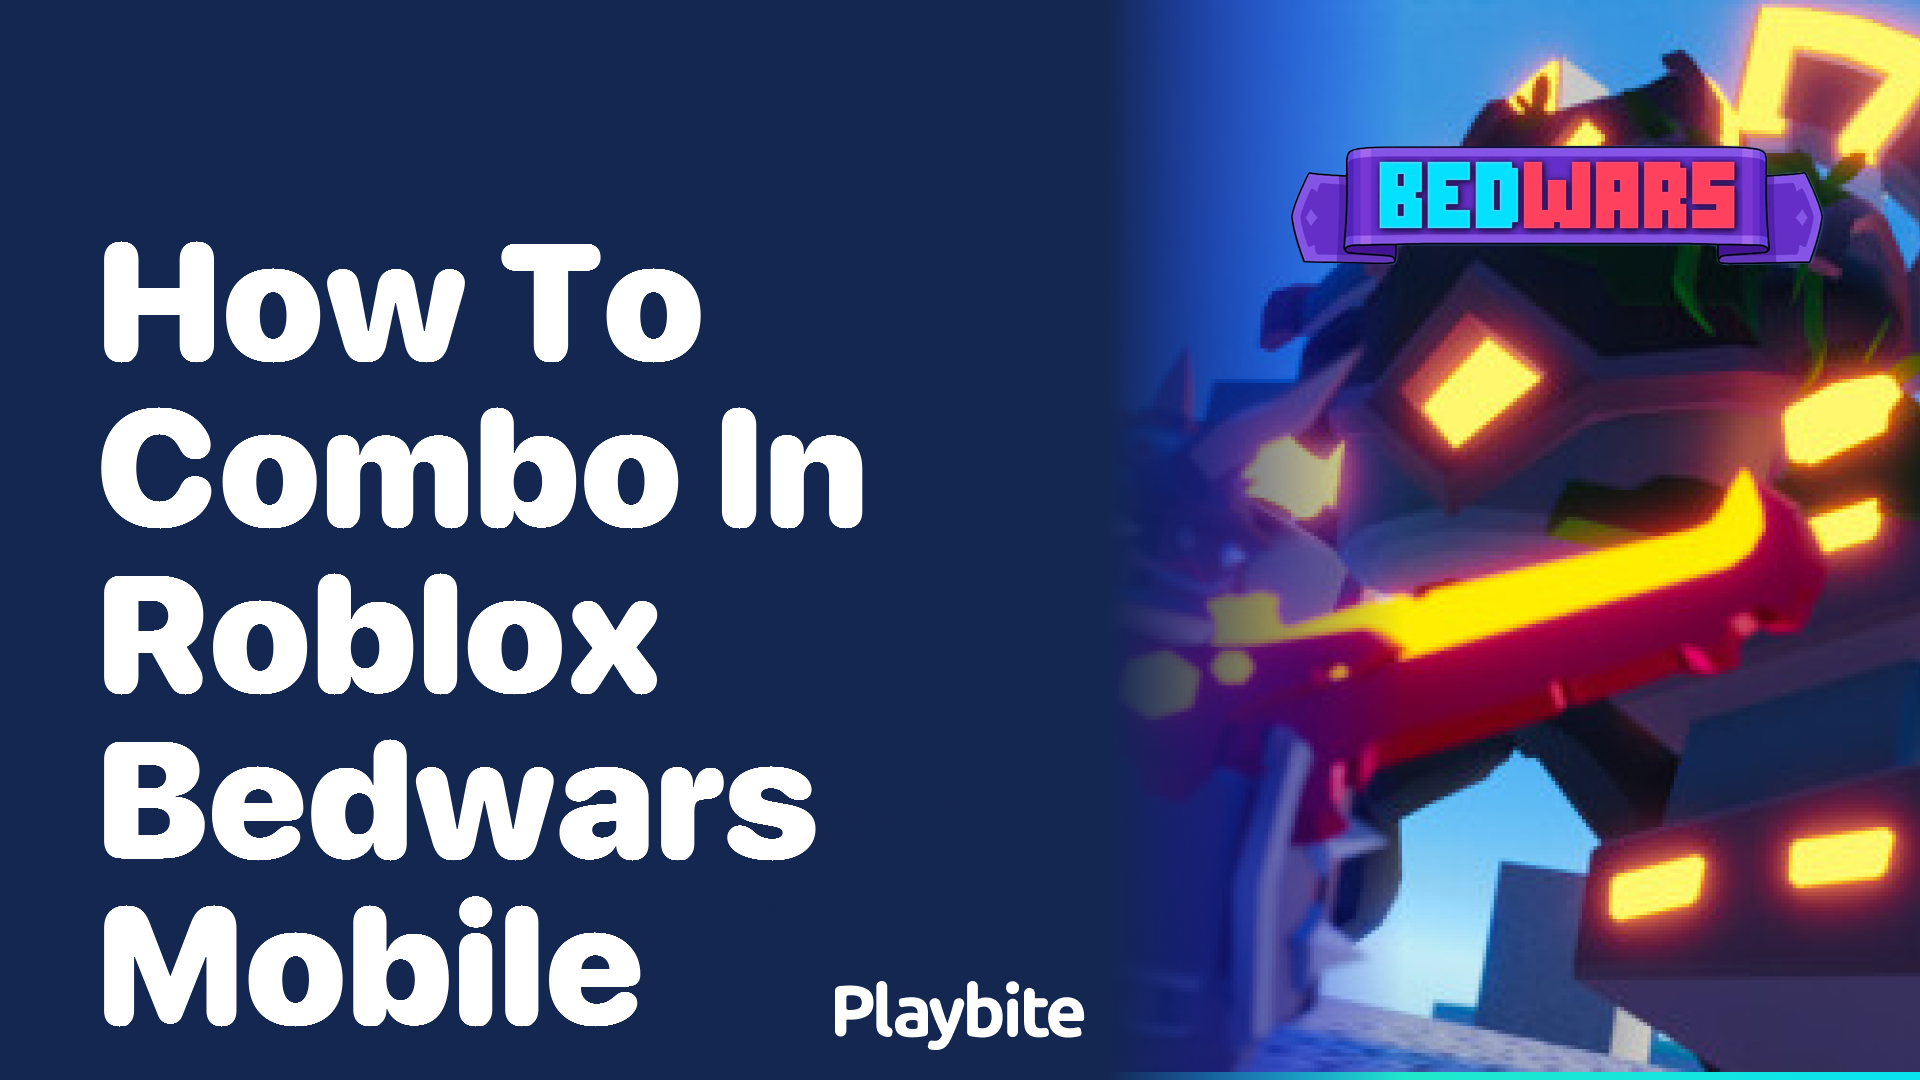 Mastering Combos in Roblox Bedwars Mobile: Tips and Tricks - Playbite